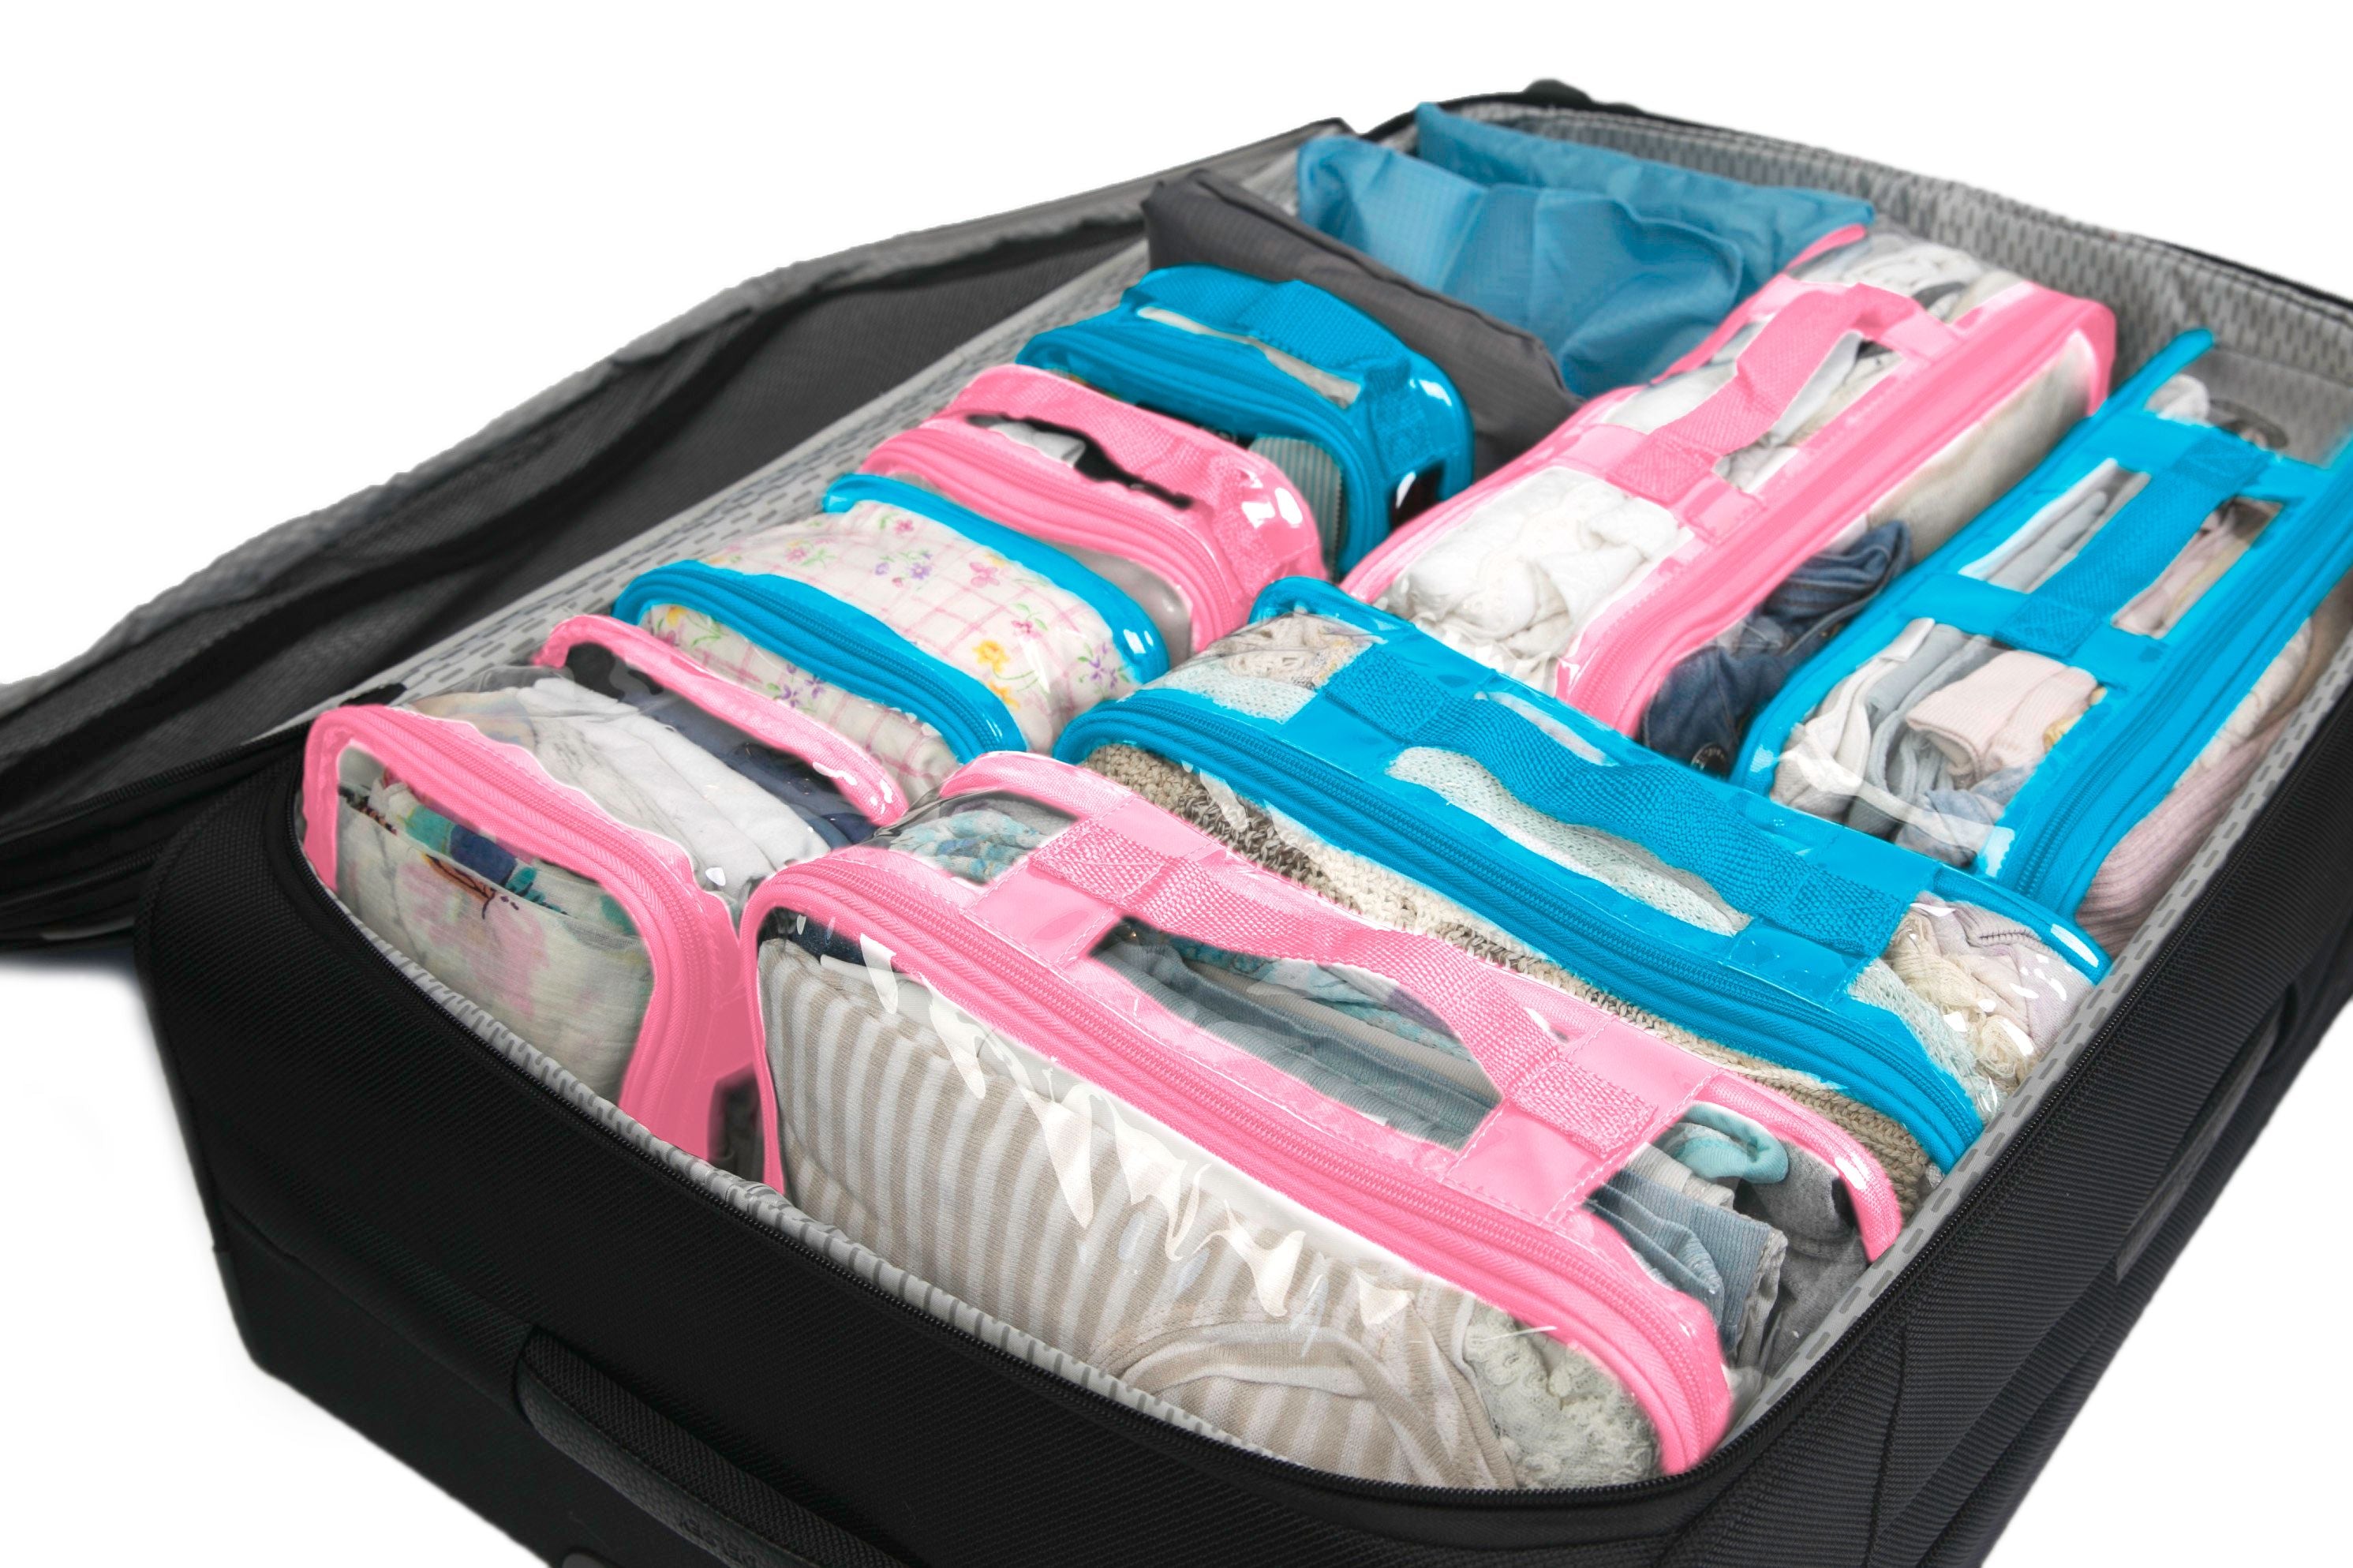 Packing organizers for travel